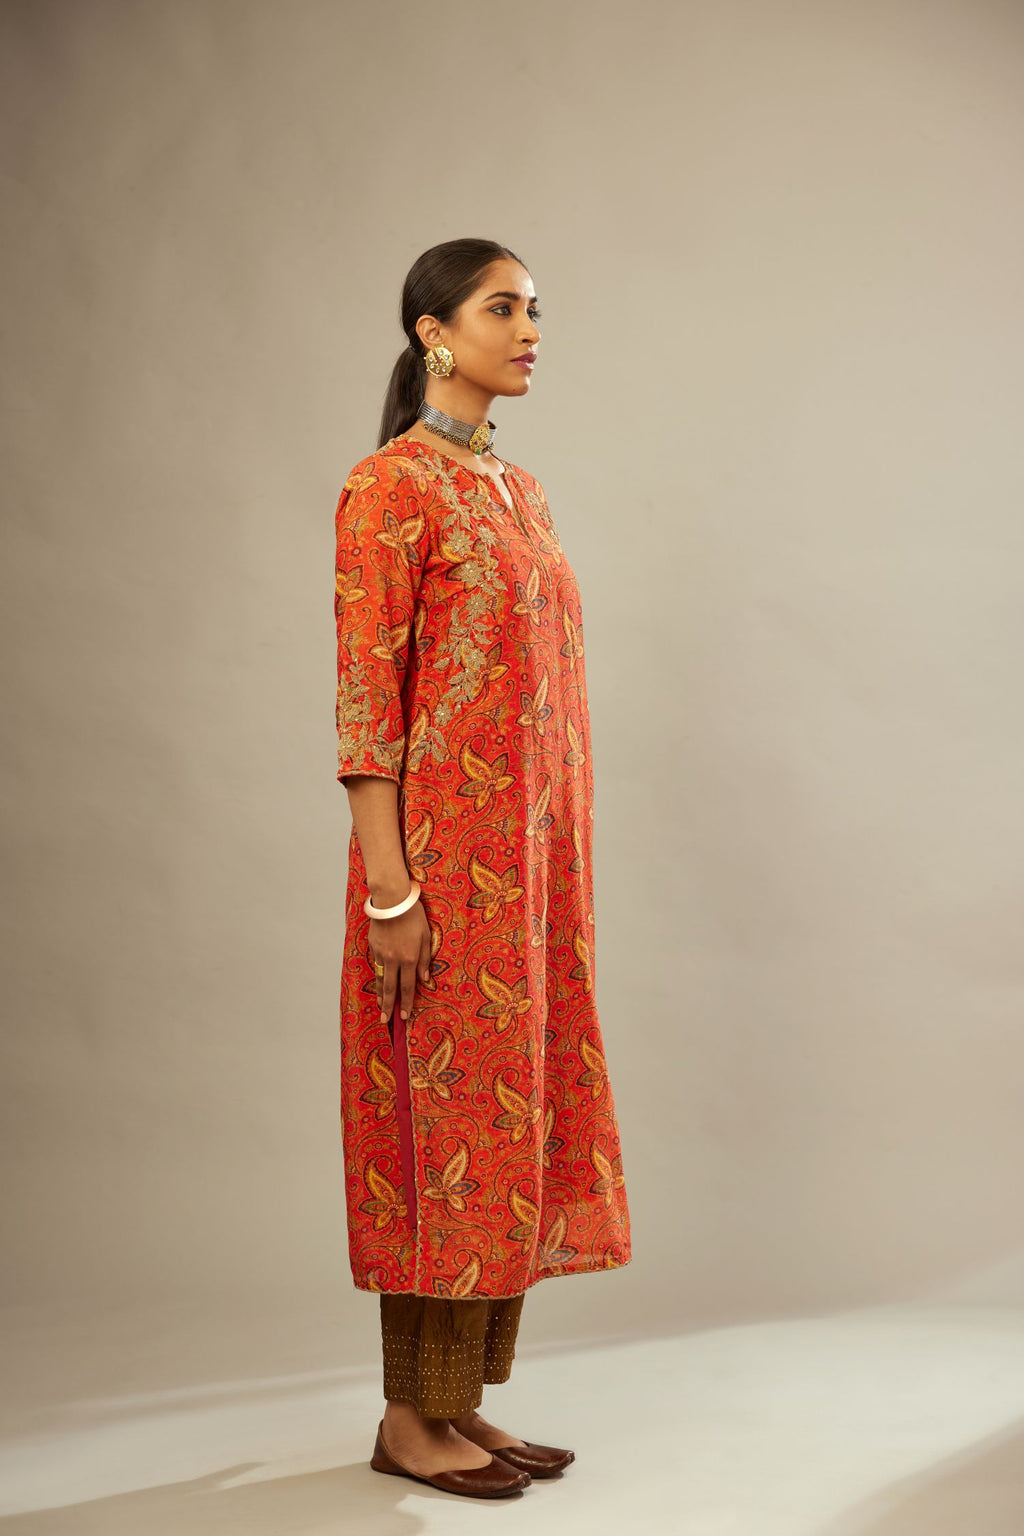 Burnt orange digital printed silk straight kurta set, highlighted with gold dori embroidery, highlighted with gold sequin hand work.